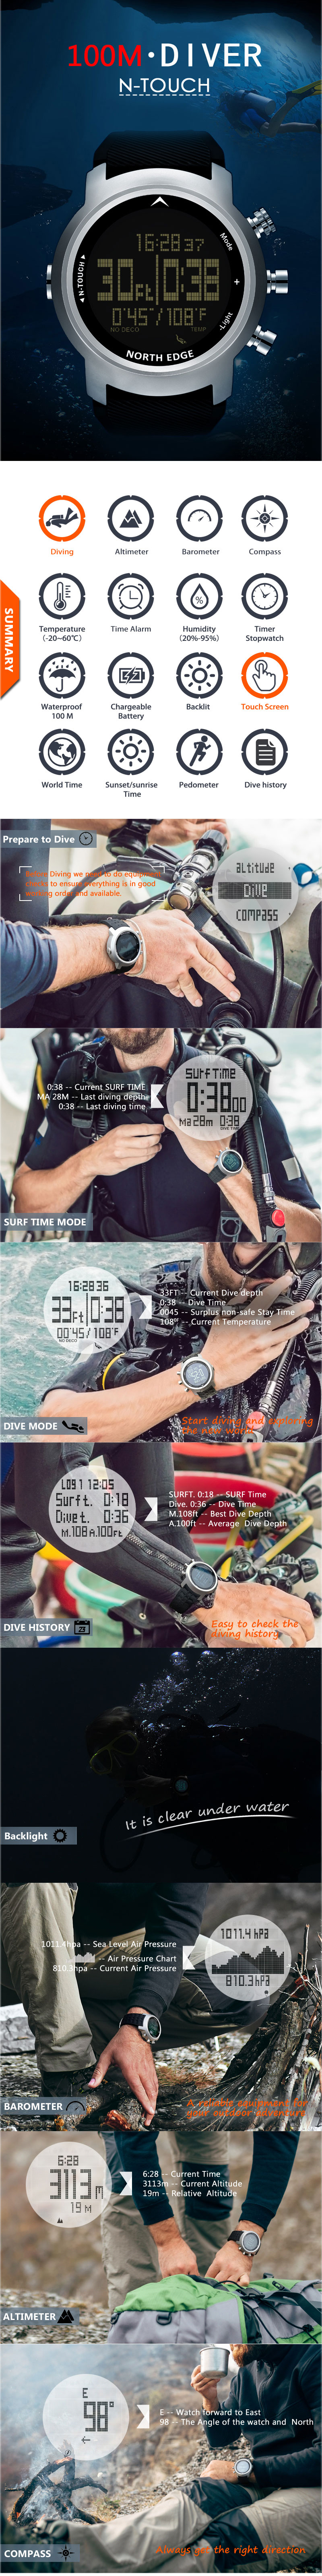 NORTH-EDGE-N-TOUCH-New-100m-Waterproof-Diving-Mode-GPS-Compass-Touch-Screen-Outdoor-Smart-Watch-1444414